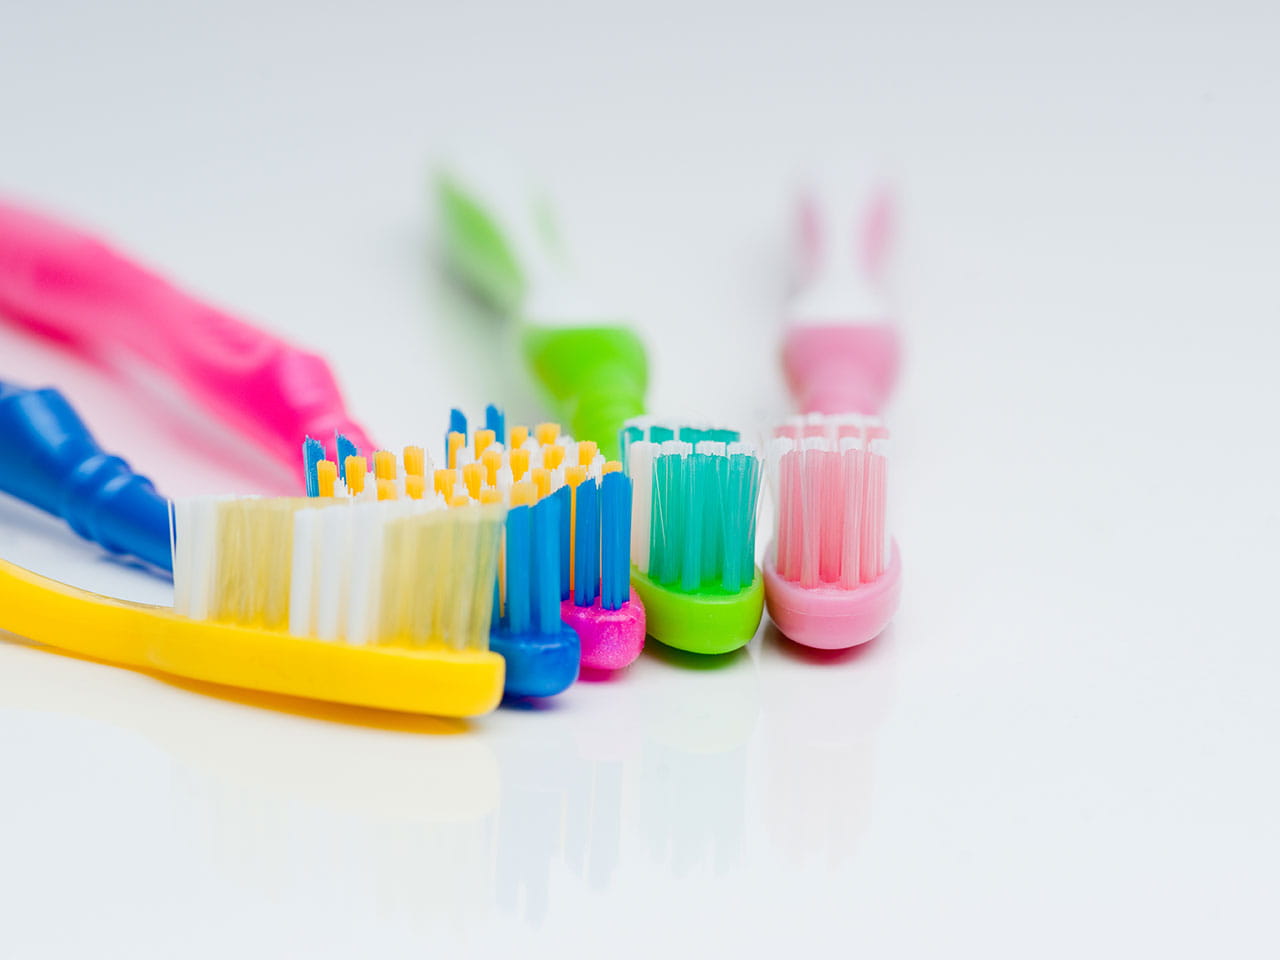 Coloured toothbrushes